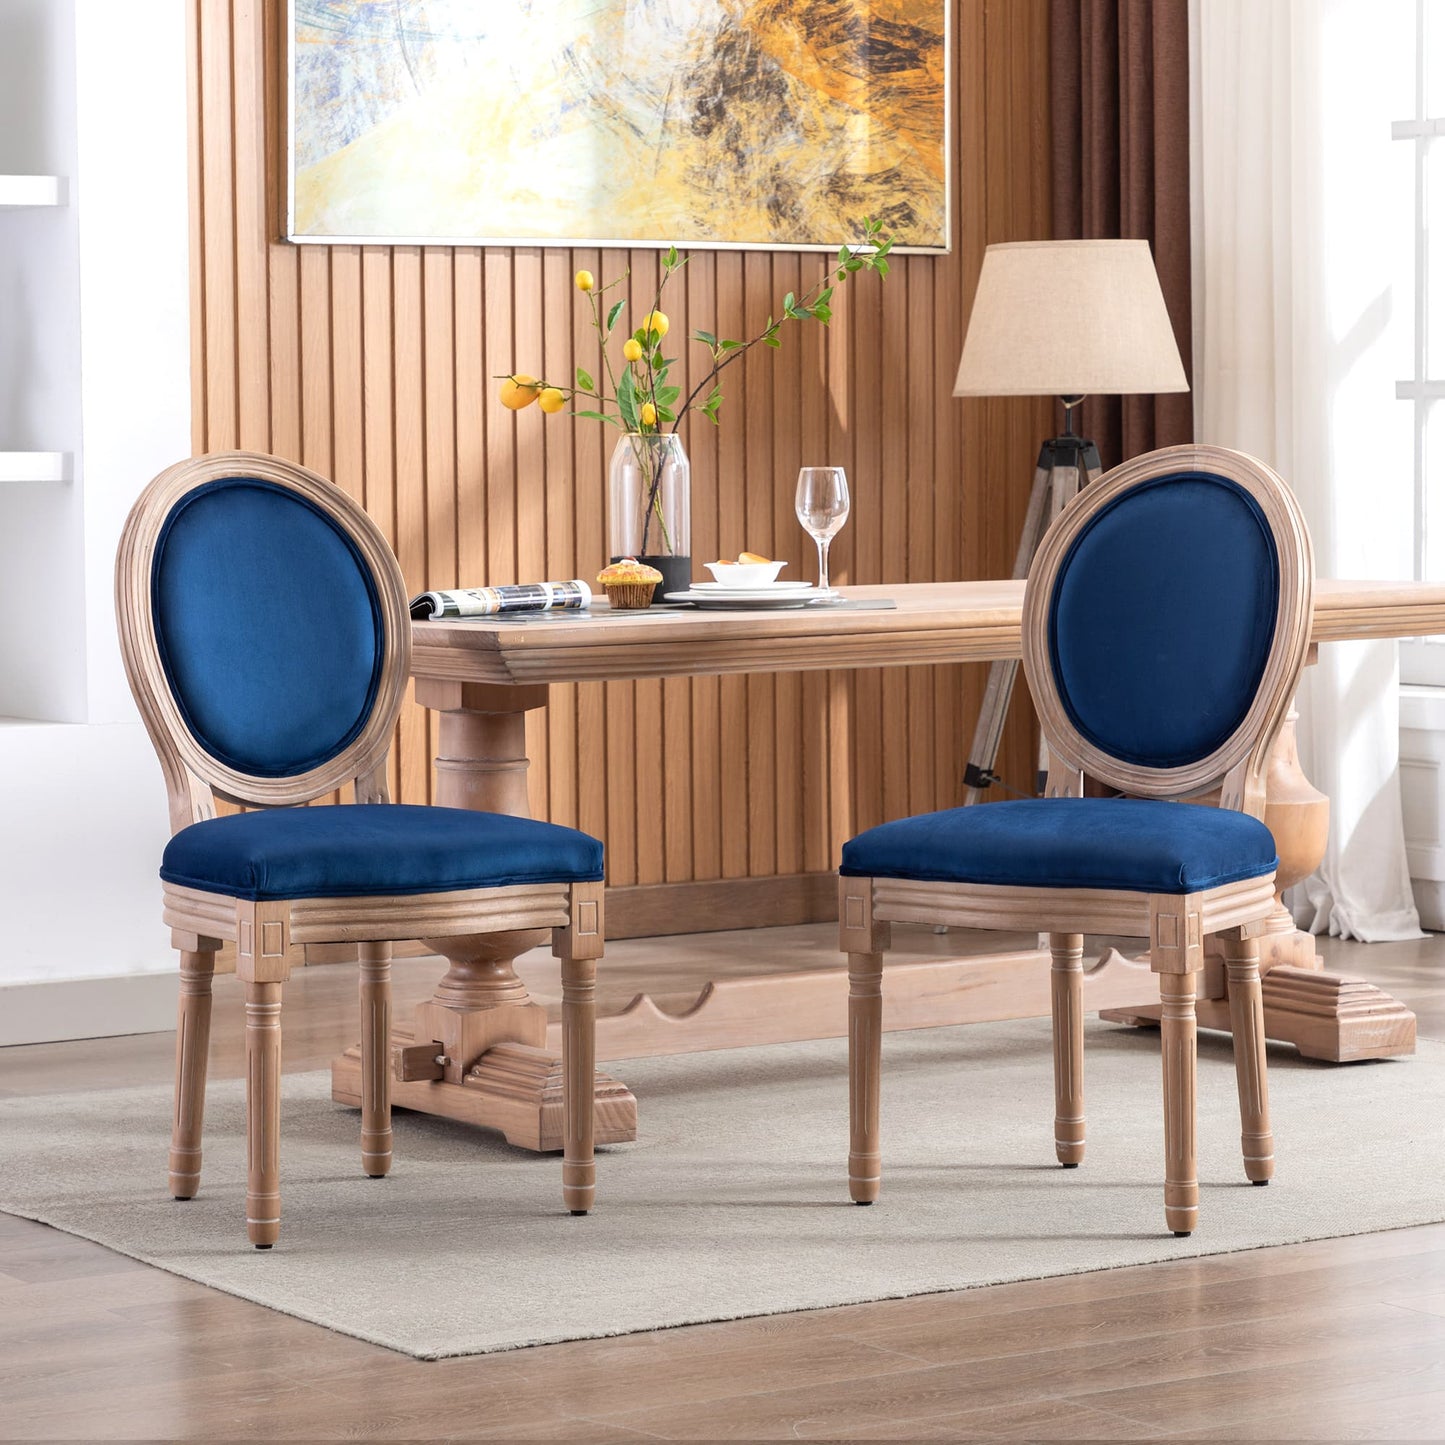 SogesPower Upholstered Fabrice French Dining Chair with rubber legs,Set of 2- Blue+Velvet